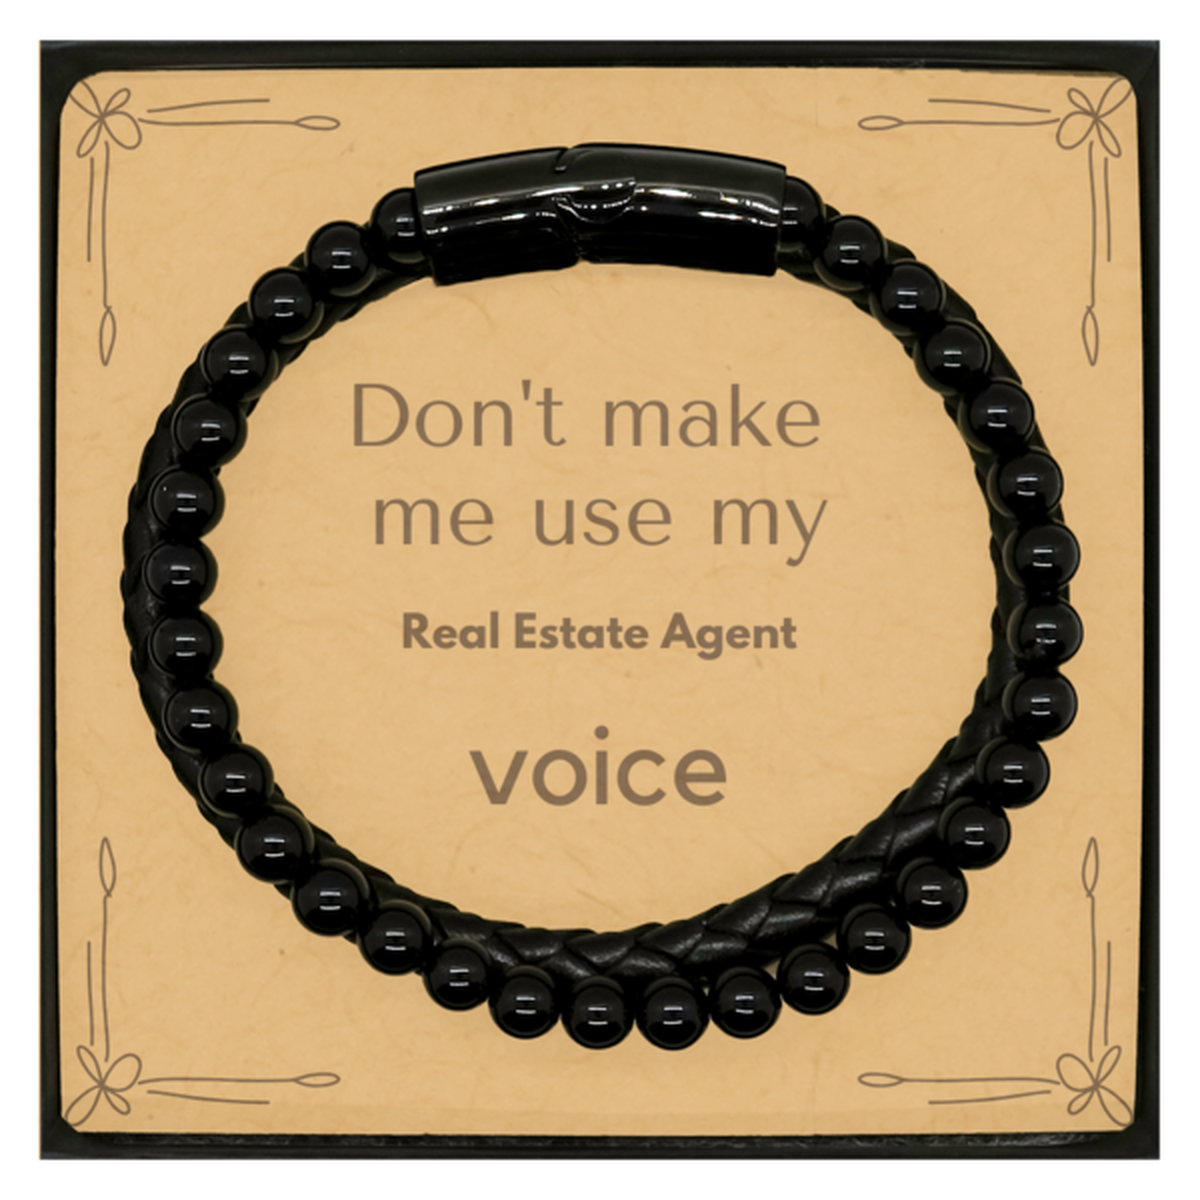 Don't make me use my Real Estate Agent voice, Sarcasm Real Estate Agent Card Gifts, Christmas Real Estate Agent Stone Leather Bracelets Birthday Unique Gifts For Real Estate Agent Coworkers, Men, Women, Colleague, Friends